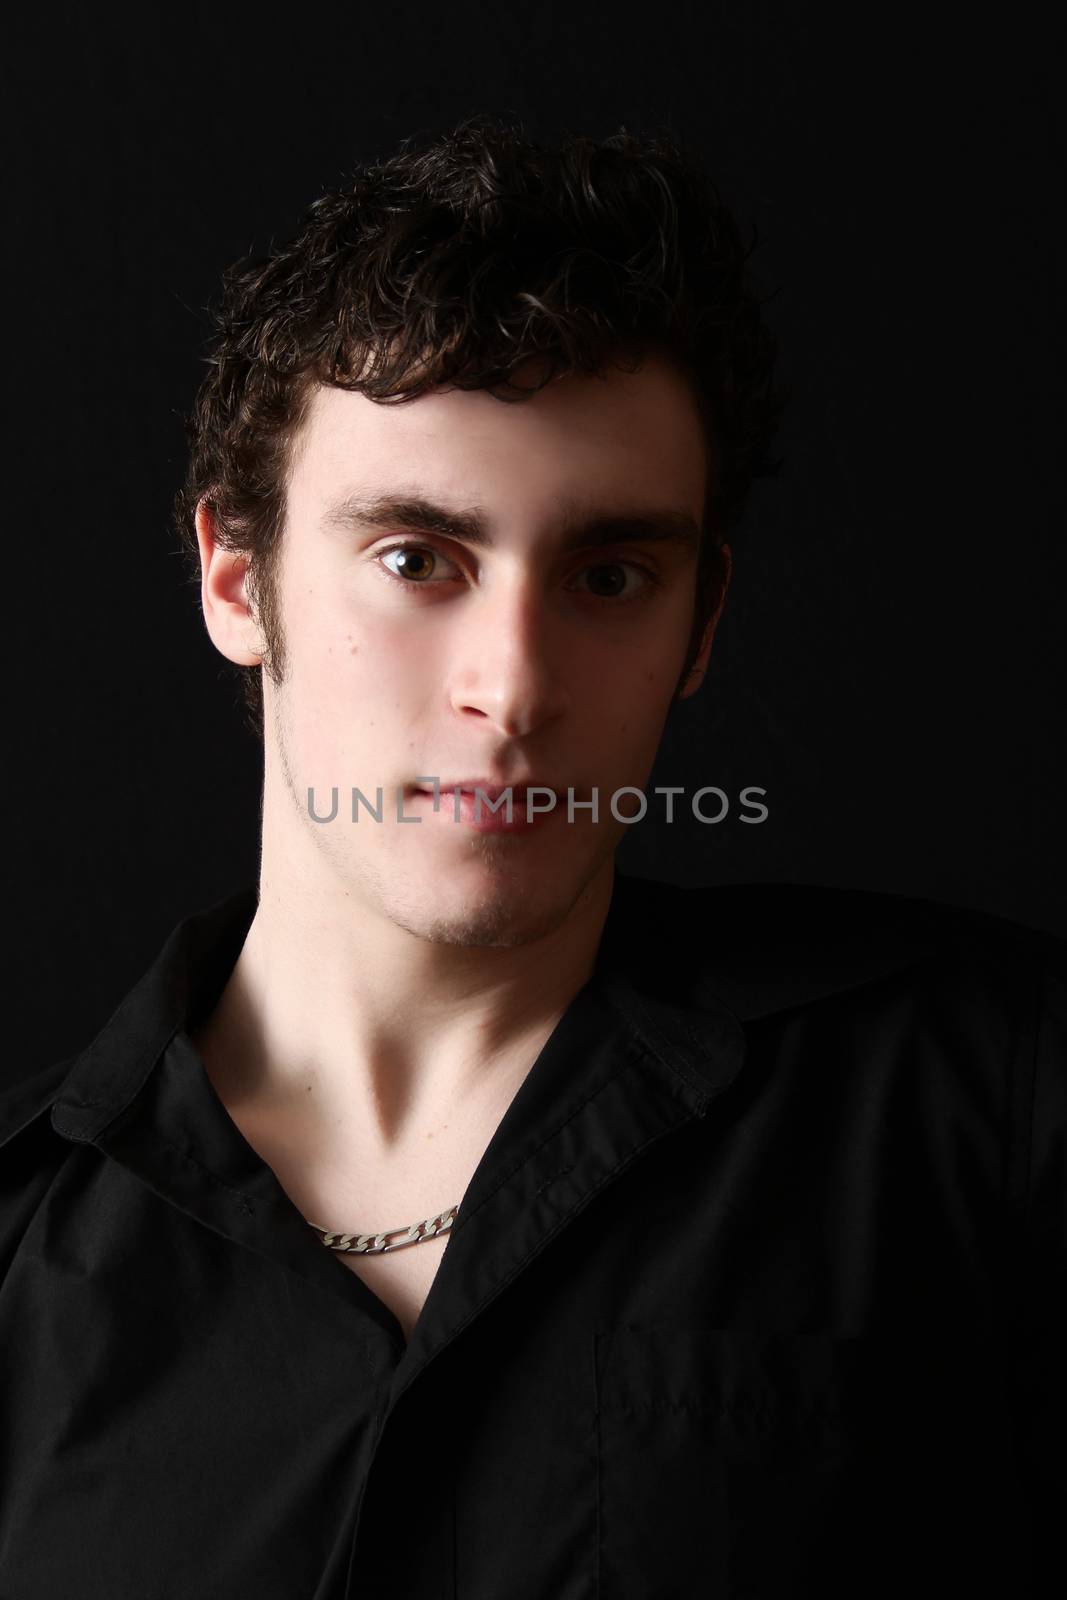 Attractive male model against black background with uneven lighting